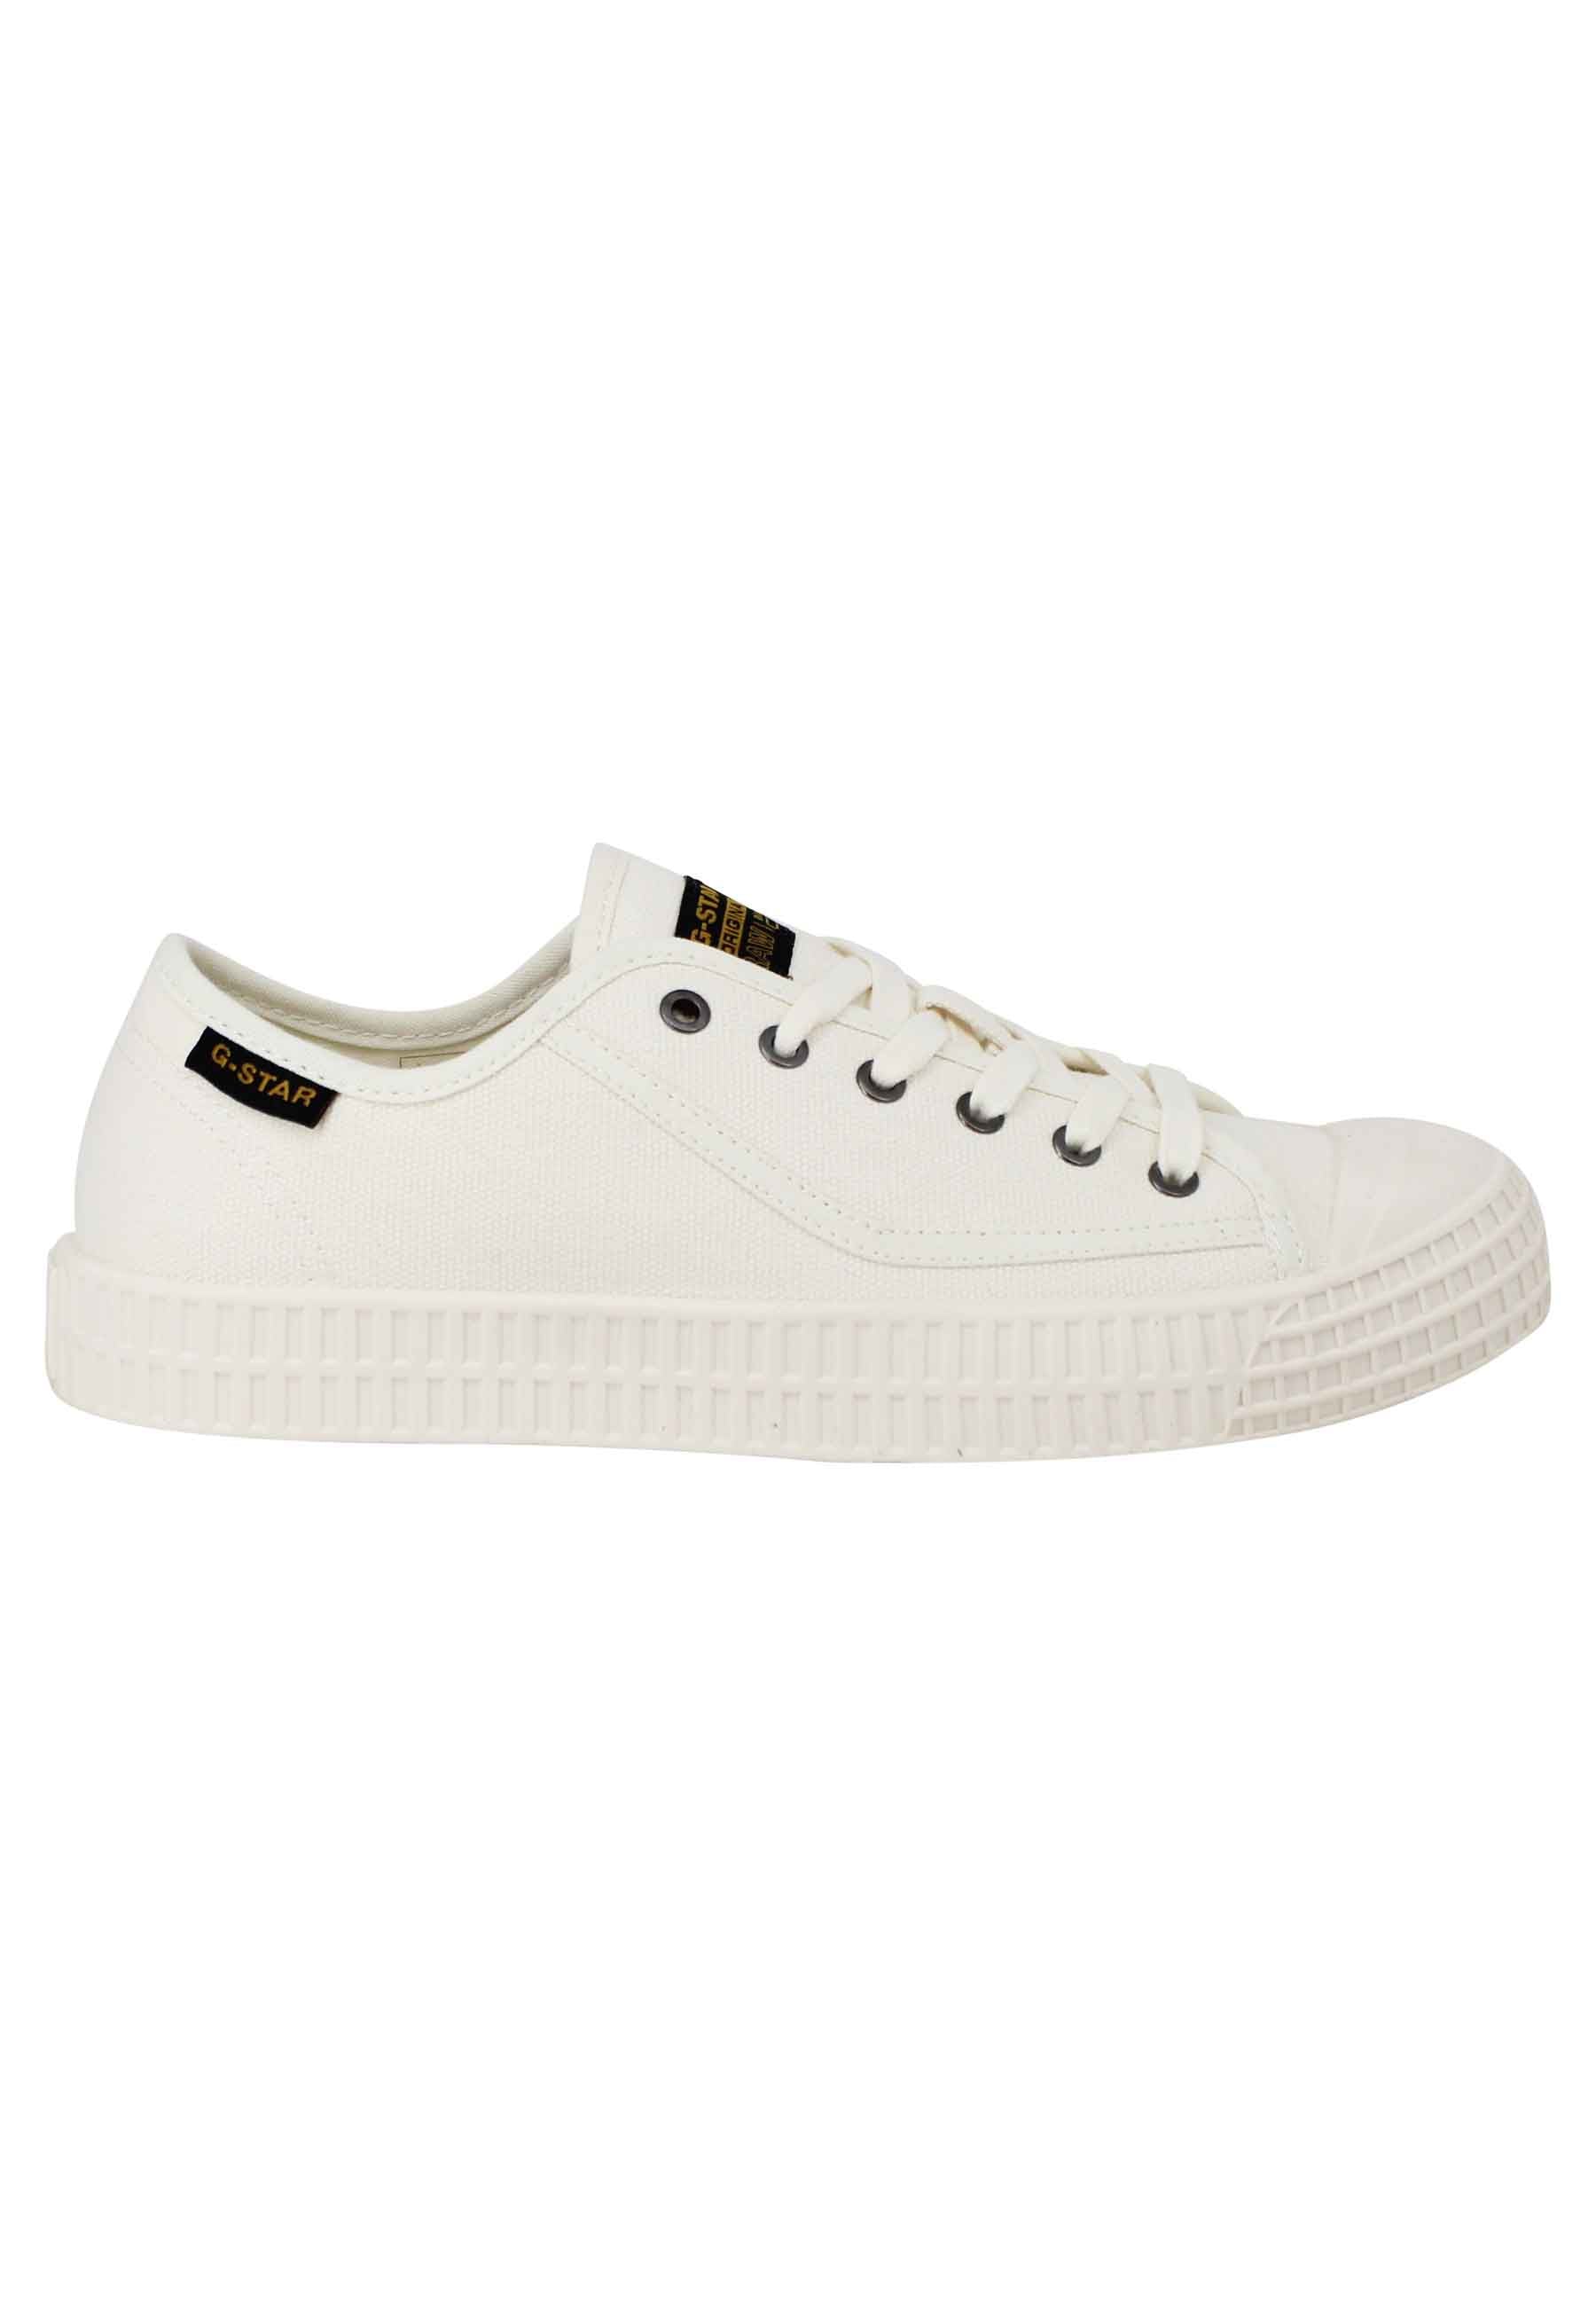 Rovulc II men's sneakers in off-white canvas